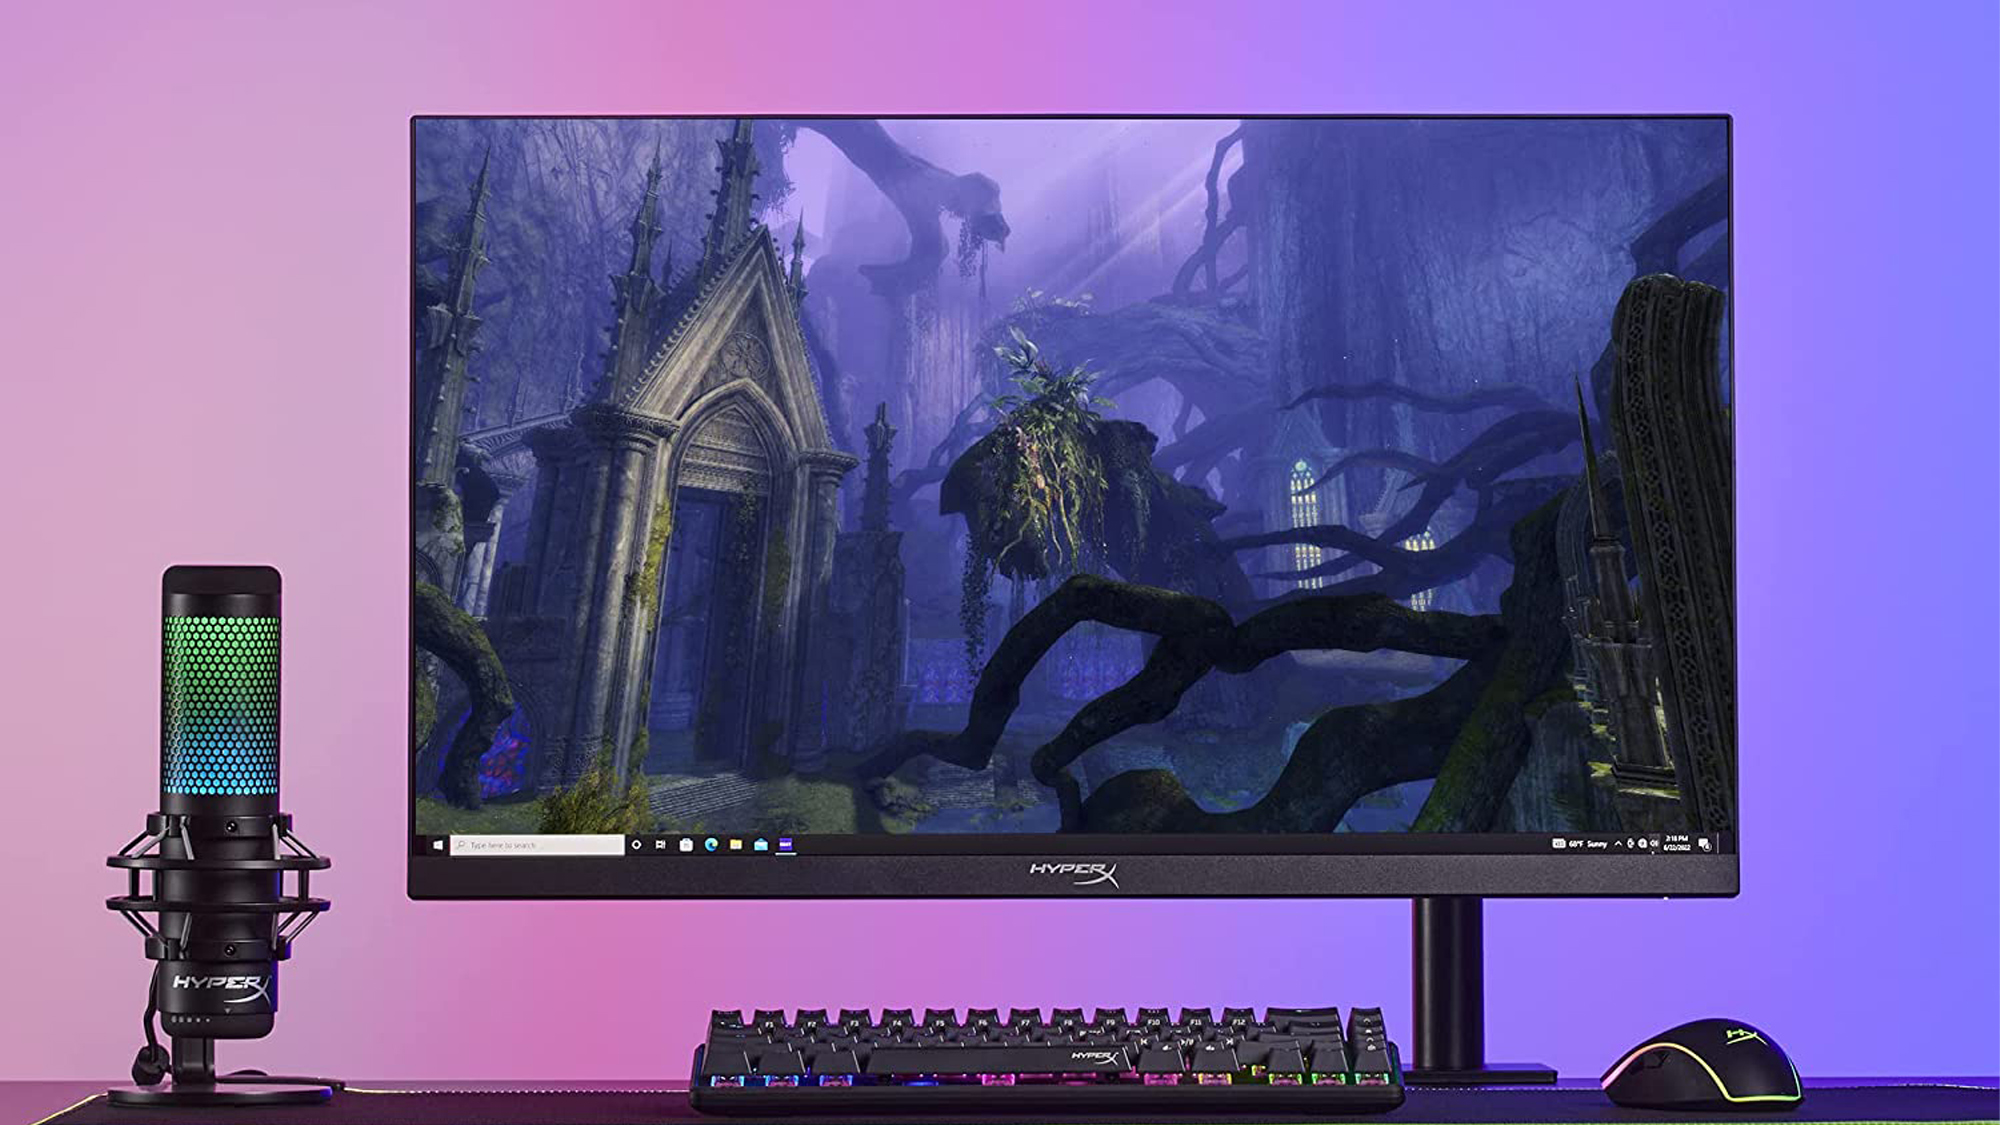 Gigabyte M27Q X review: Lush color in a 240Hz monitor